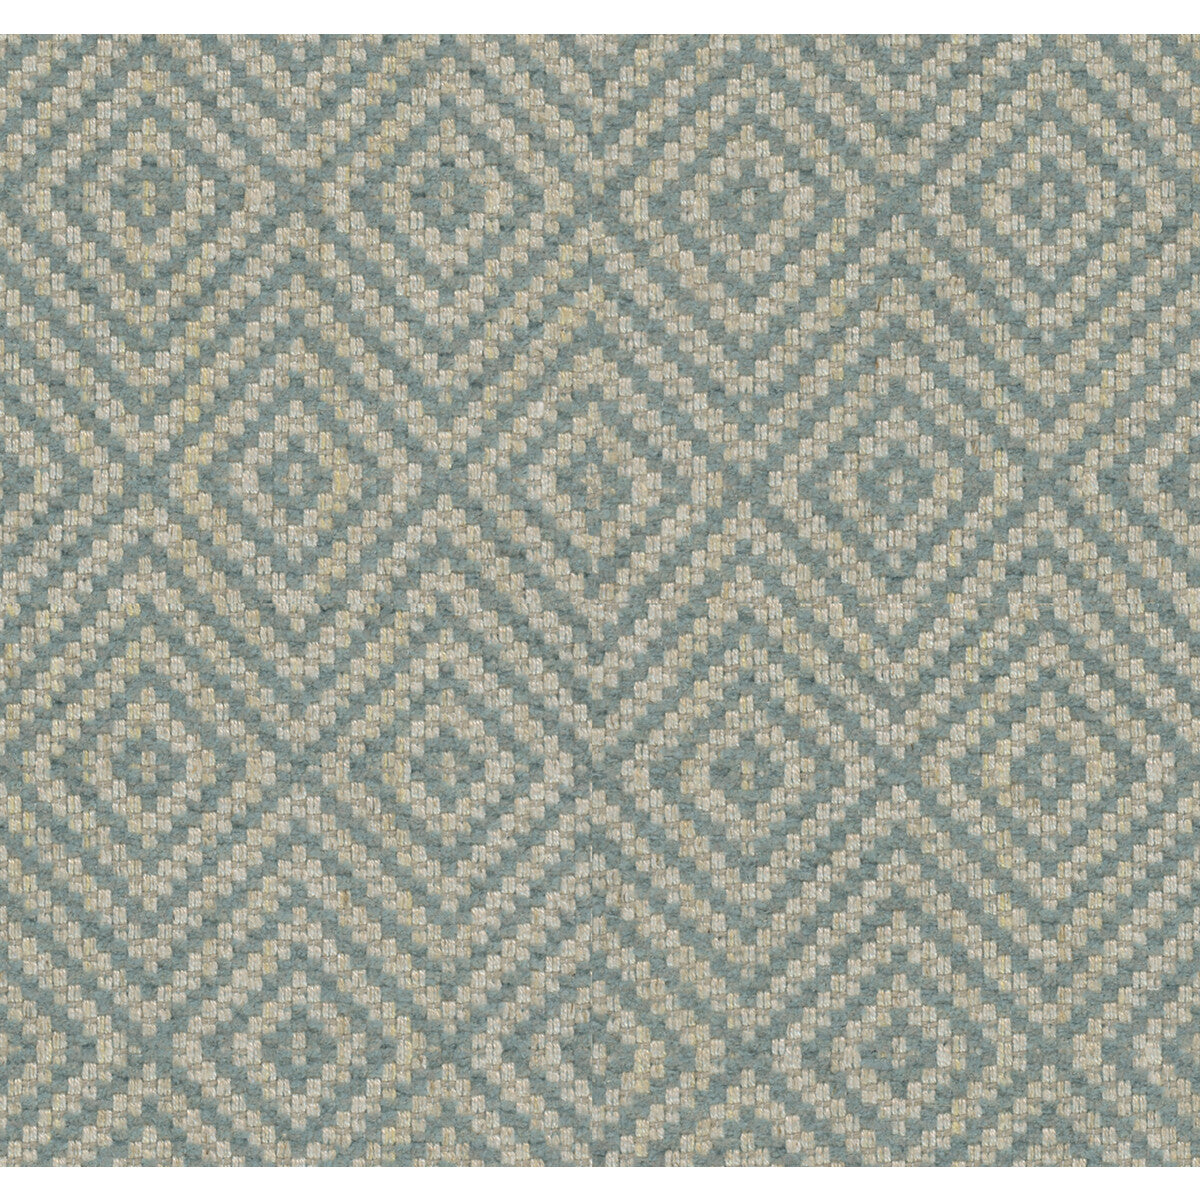 Focal Point fabric in cerulean color - pattern 34399.511.0 - by Kravet Couture